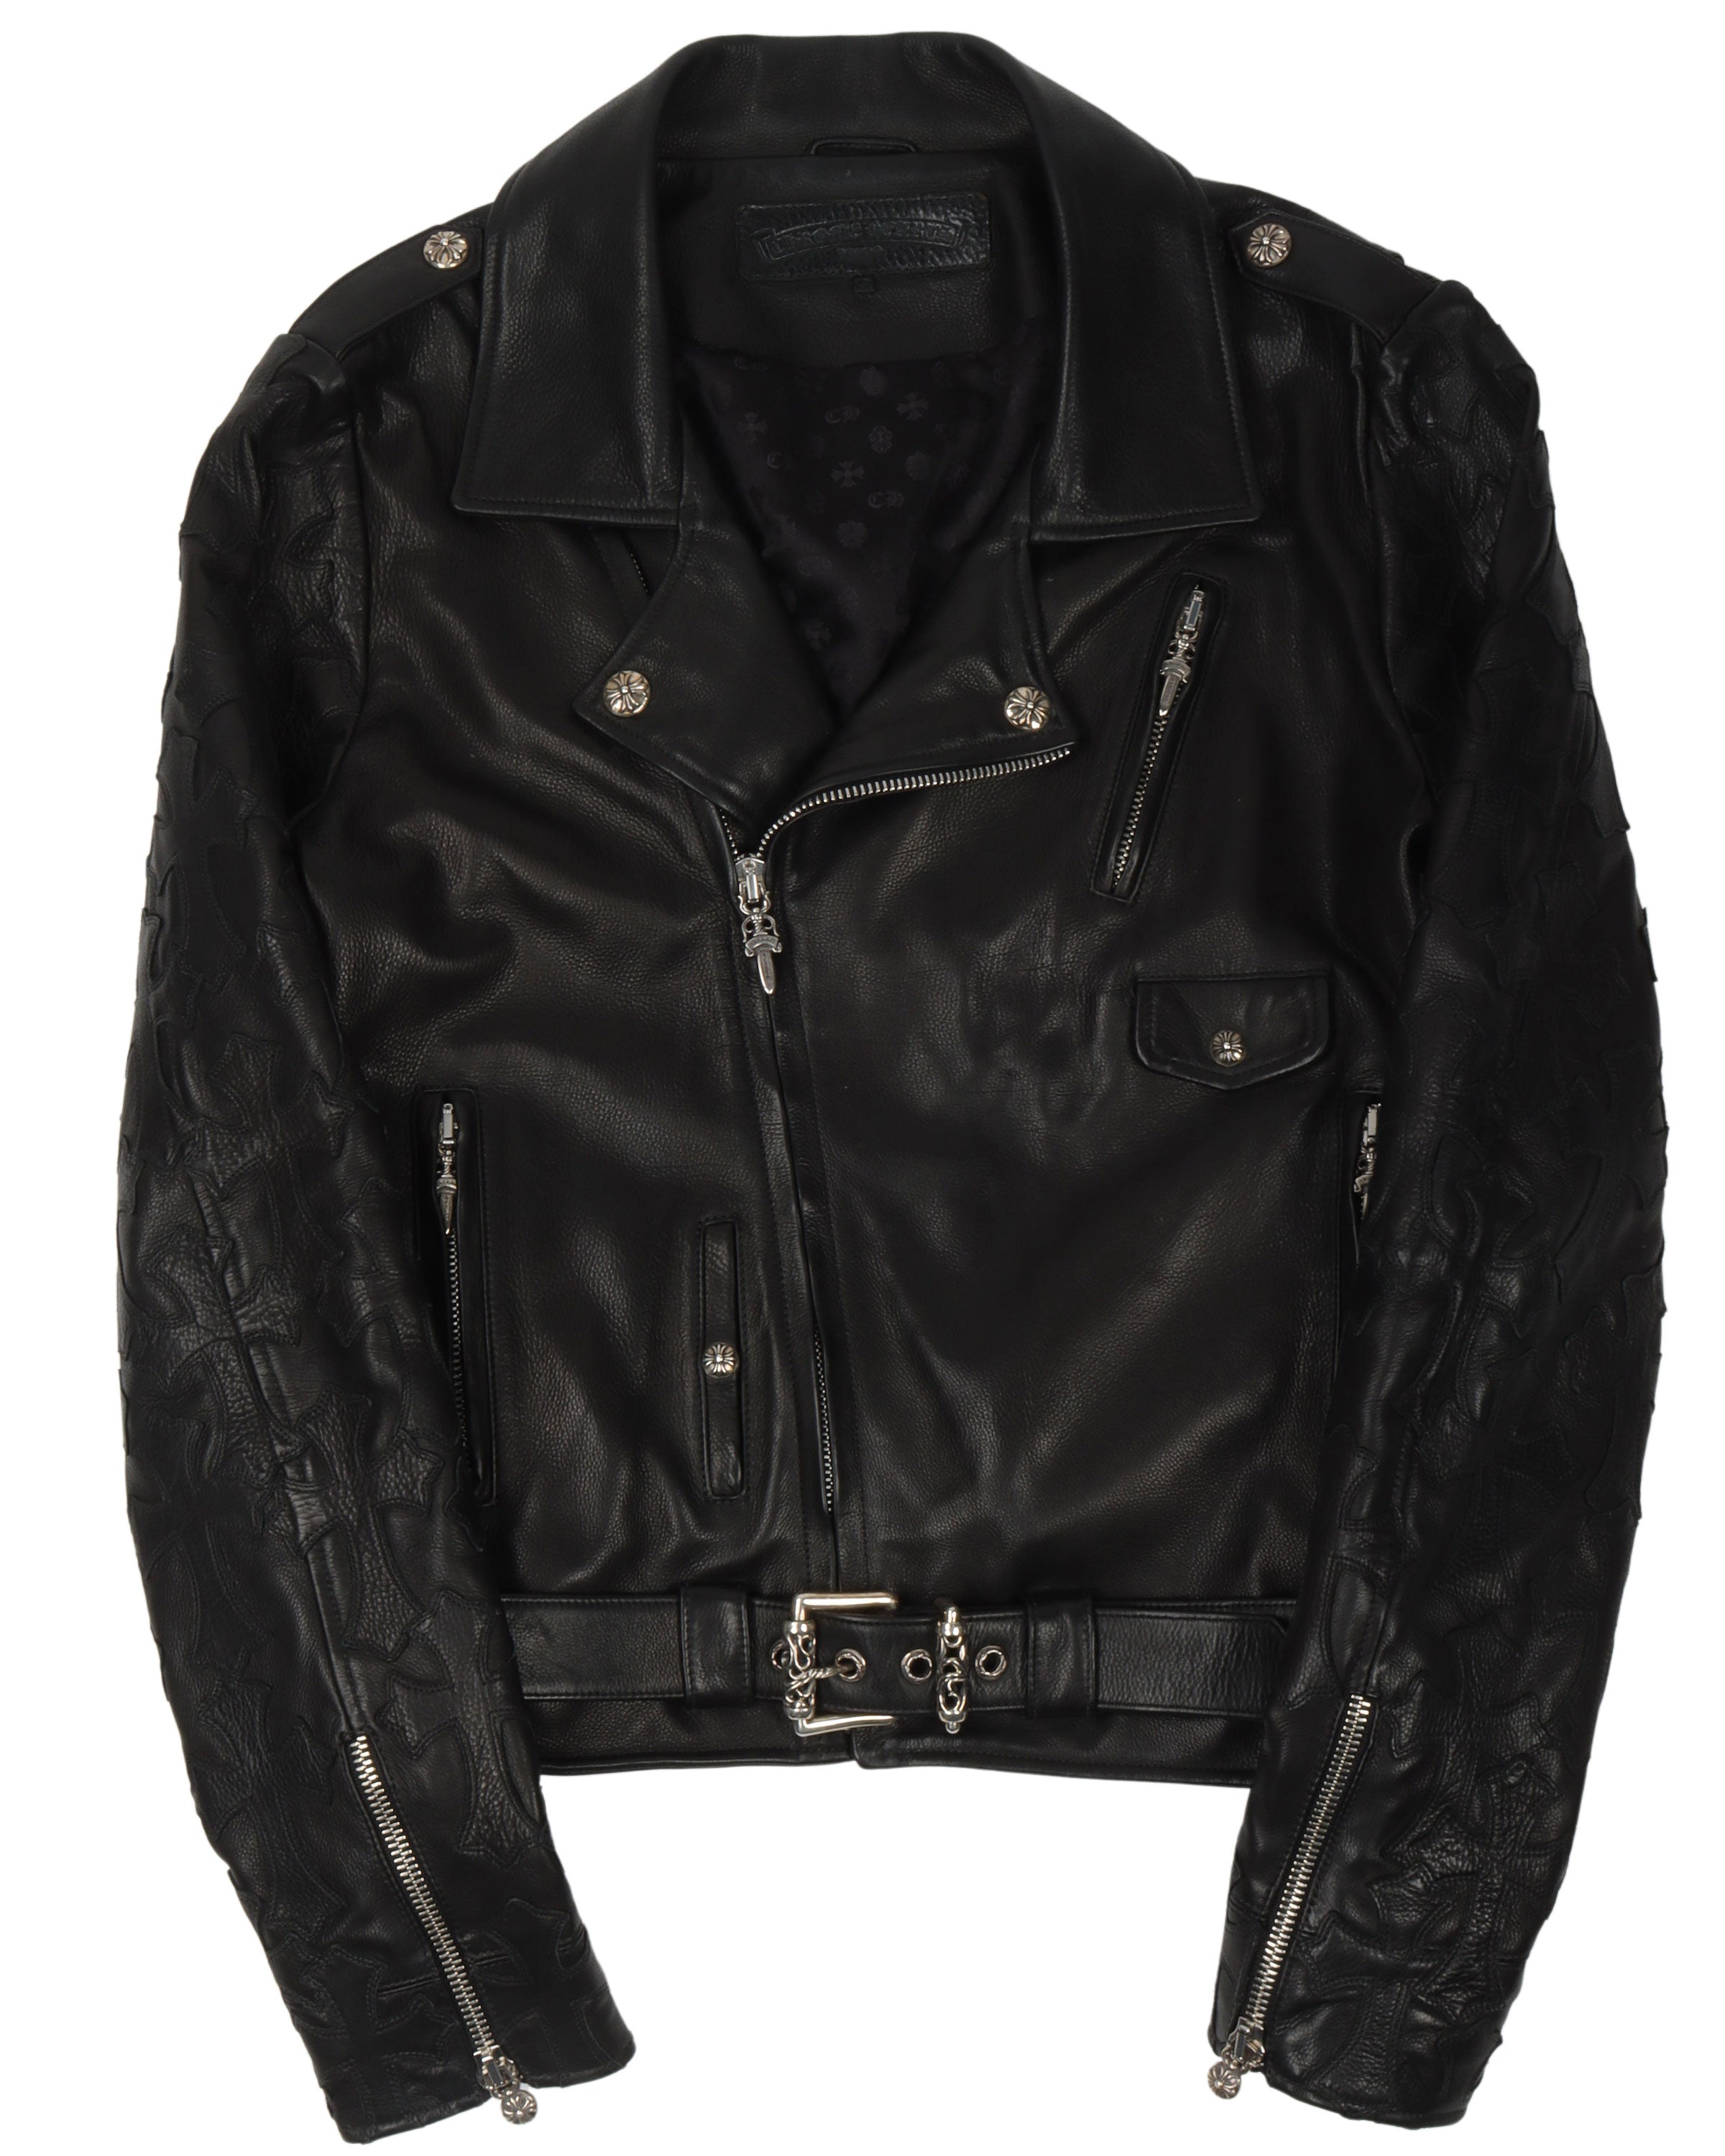 Chrome Hearts Cross Patch Leather Perfecto Jacket